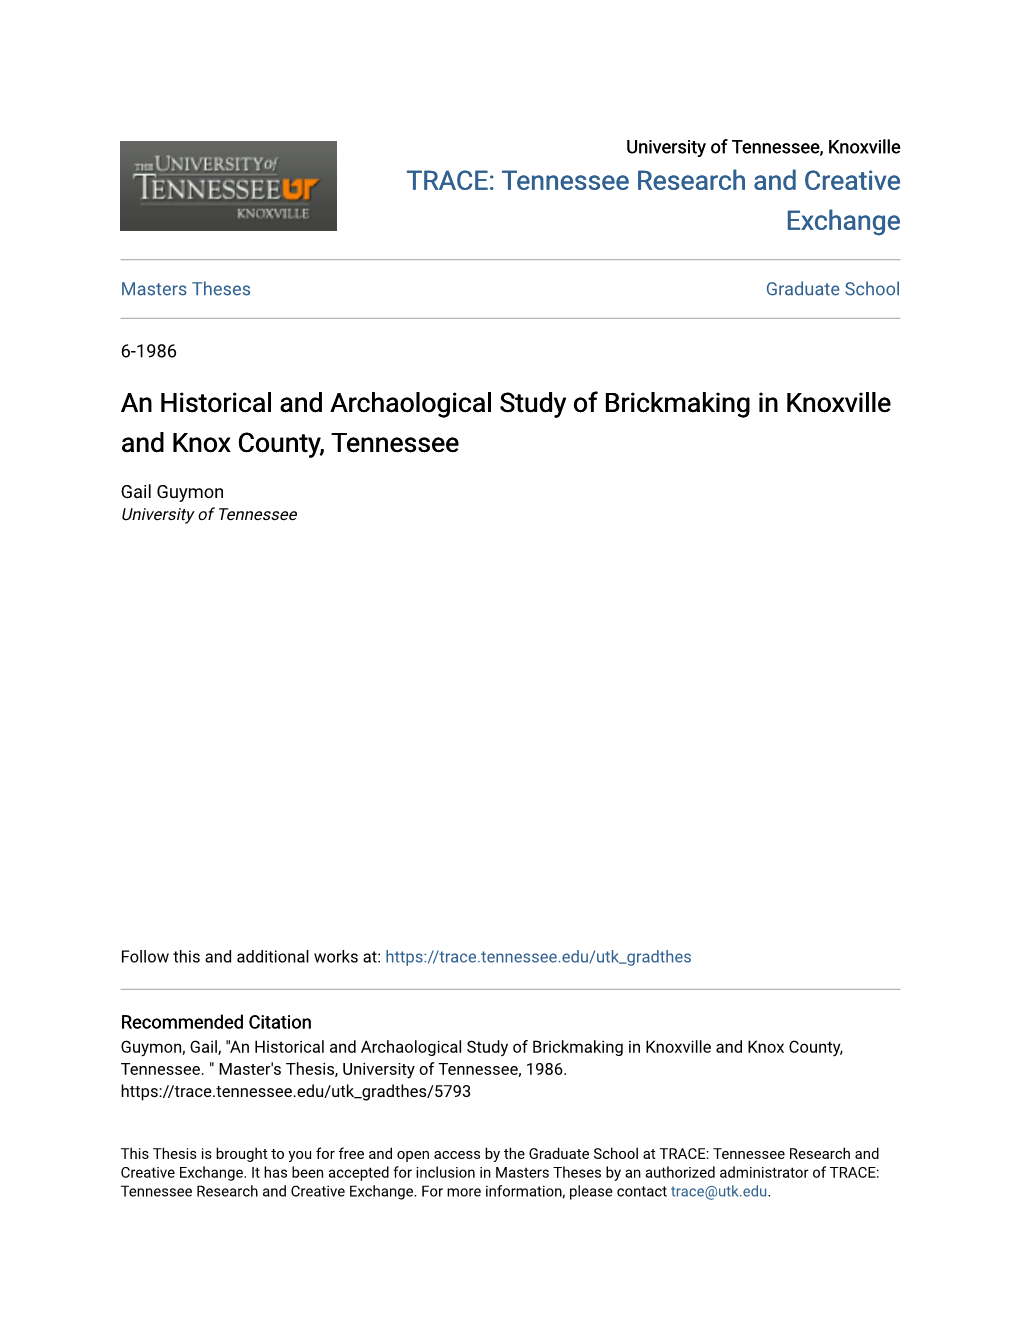 An Historical and Archaological Study of Brickmaking in Knoxville and Knox County, Tennessee